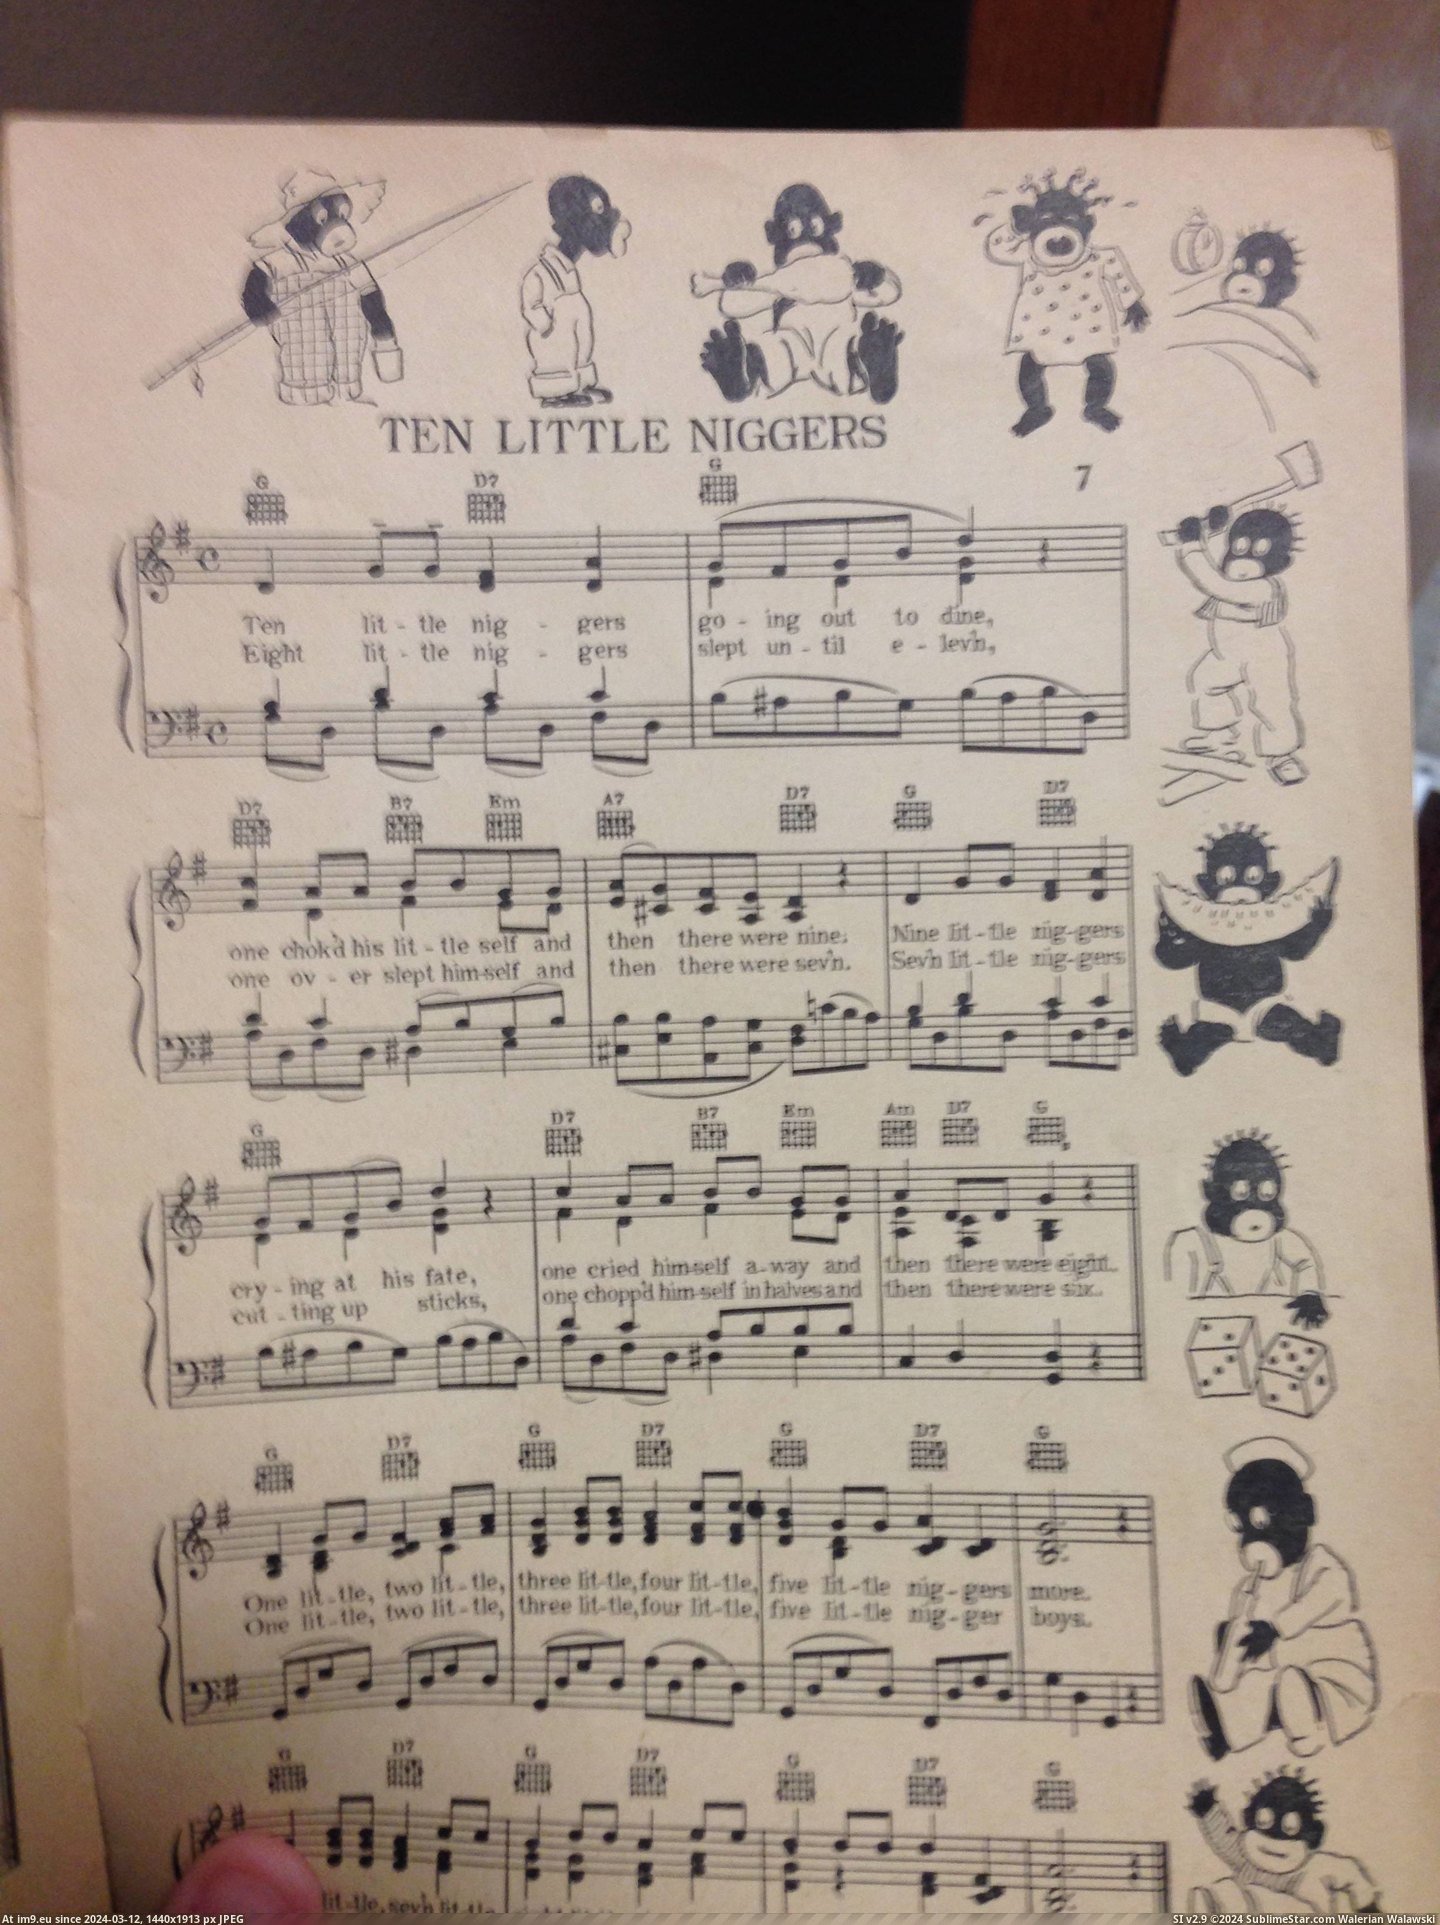 #Old #How #Normal #Illustrations #Songbook #Strange #Children #Song [Mildlyinteresting] Found an old children's songbook (c) 1937. Strange to think of how normal this song and the illustrations wo Pic. (Изображение из альбом My r/MILDLYINTERESTING favs))